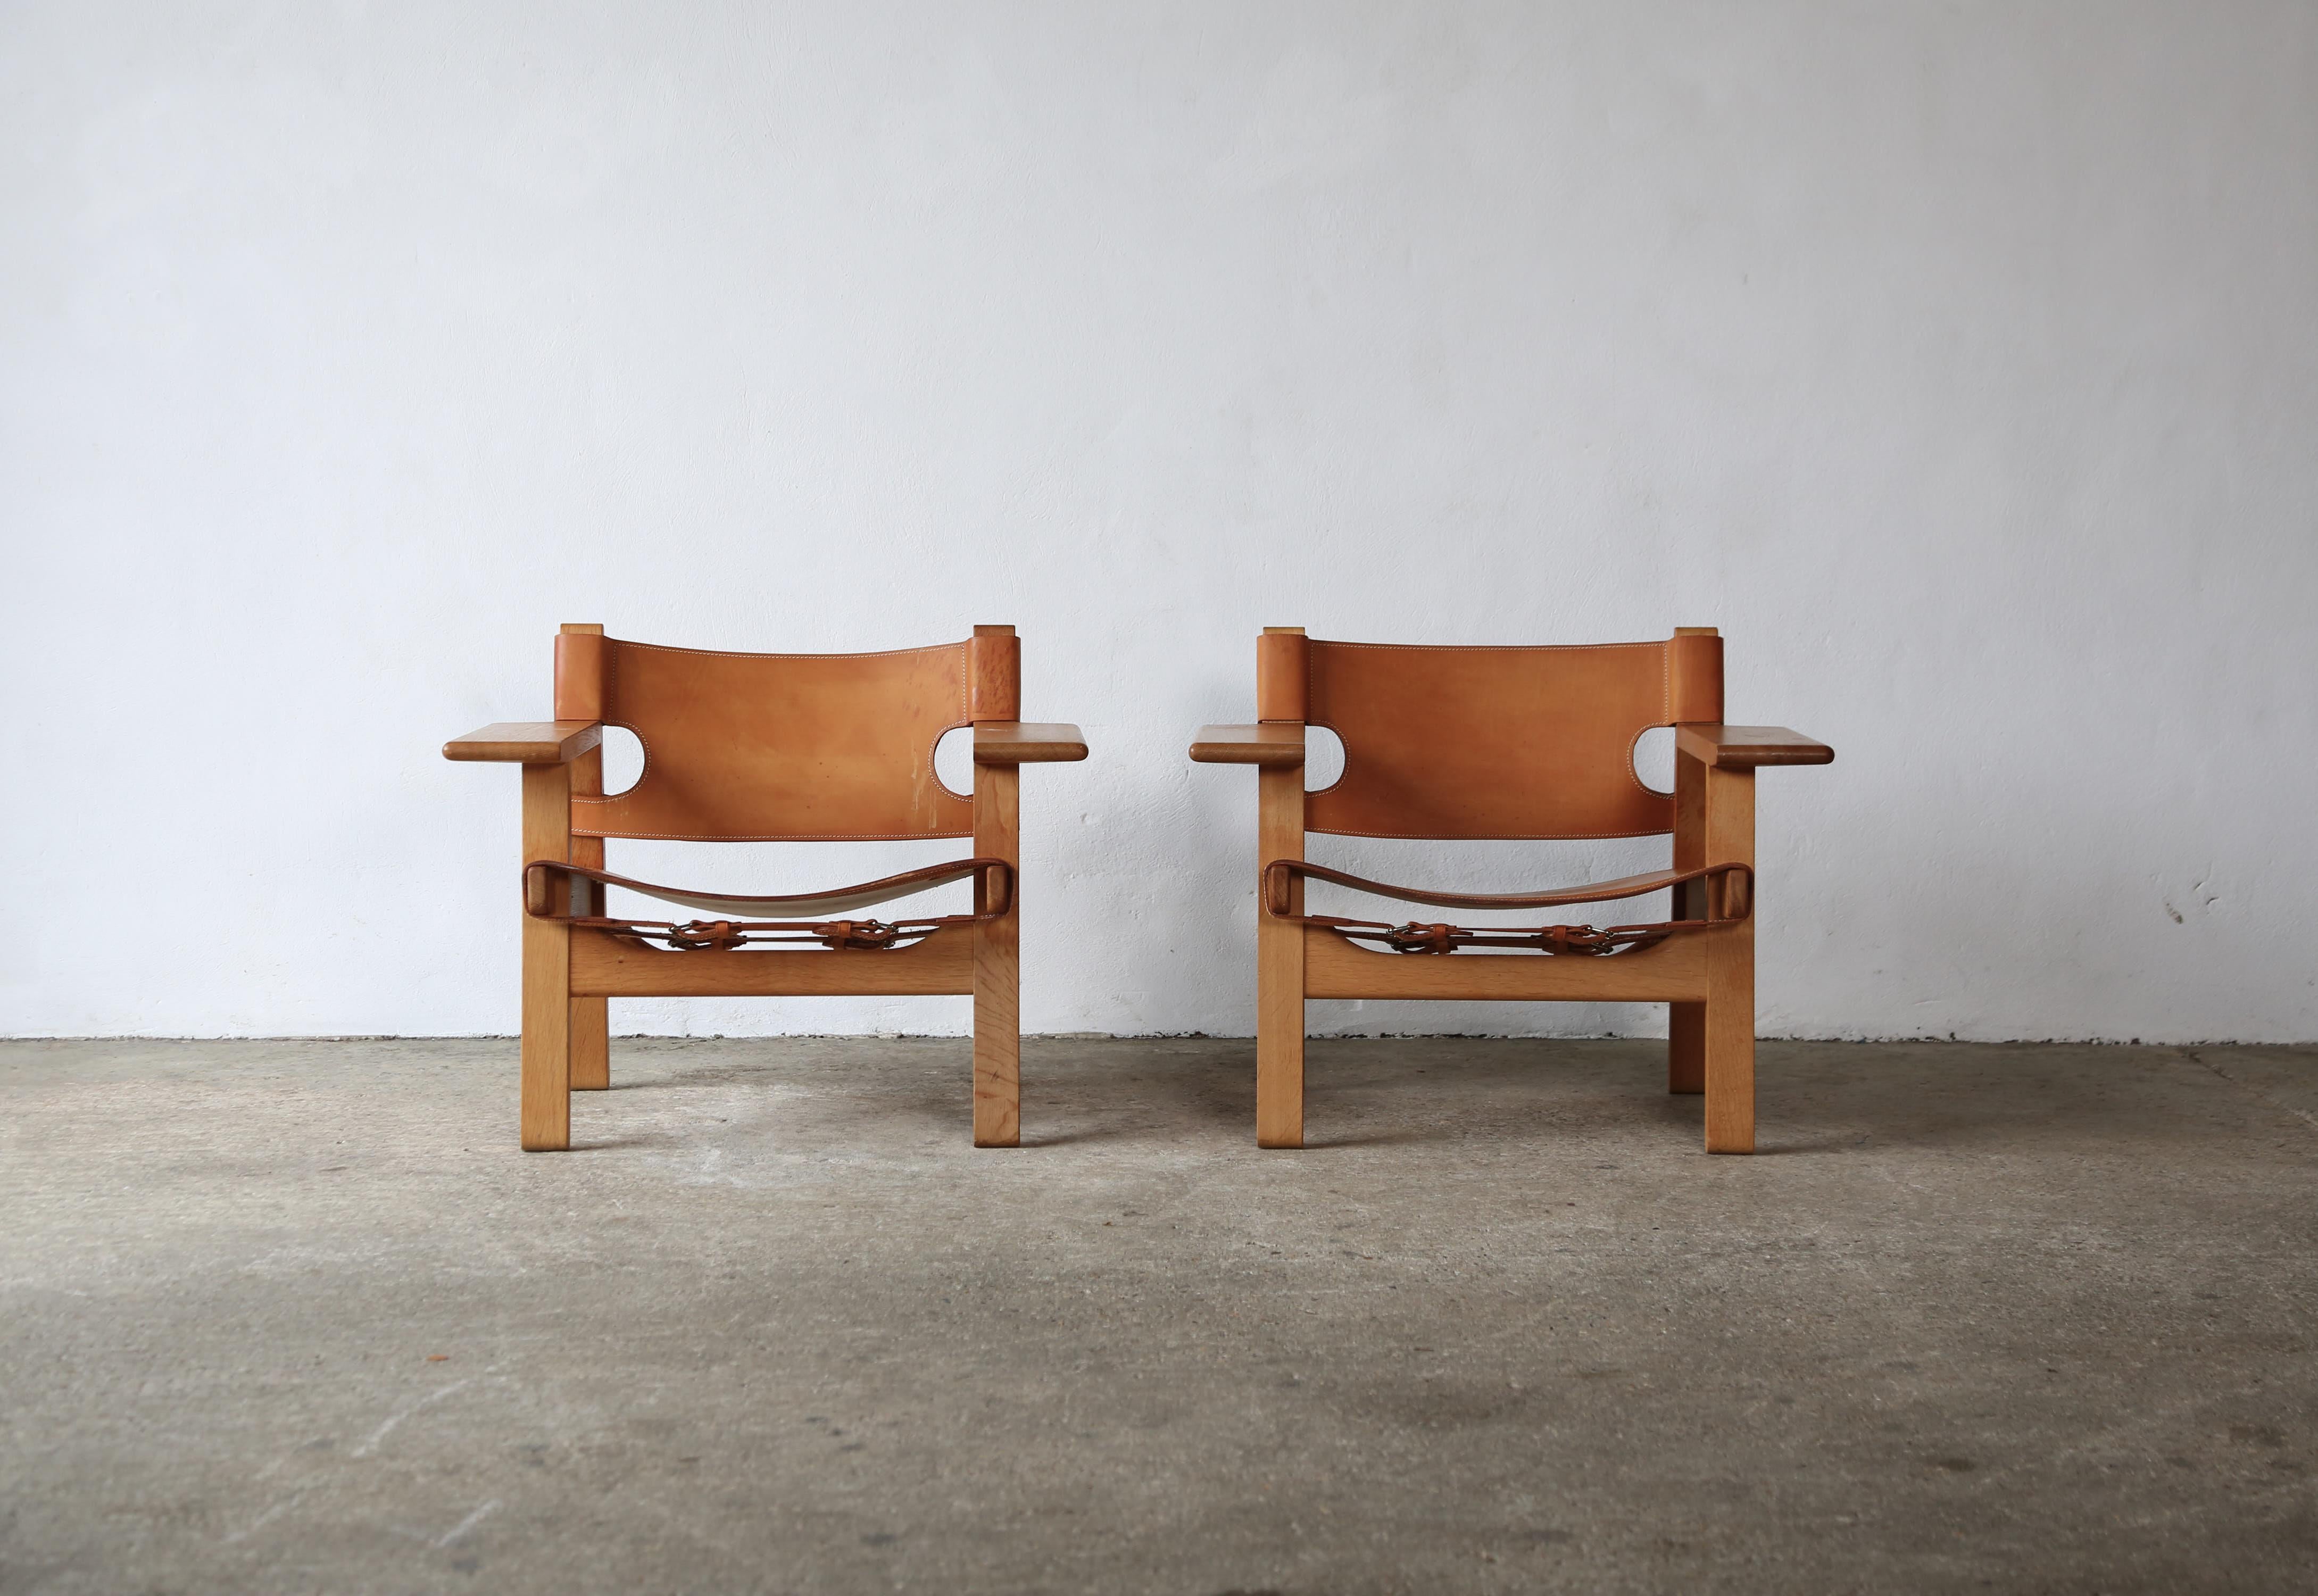 Pair of Spanish chairs by Børge Mogensen for Fredericia Stolefabrik, Denmark. Solid oak frame with natural saddle leather. The price is for the pair. Makers label to underside. Marks to the seat and some small marks to arms / frames as photographed